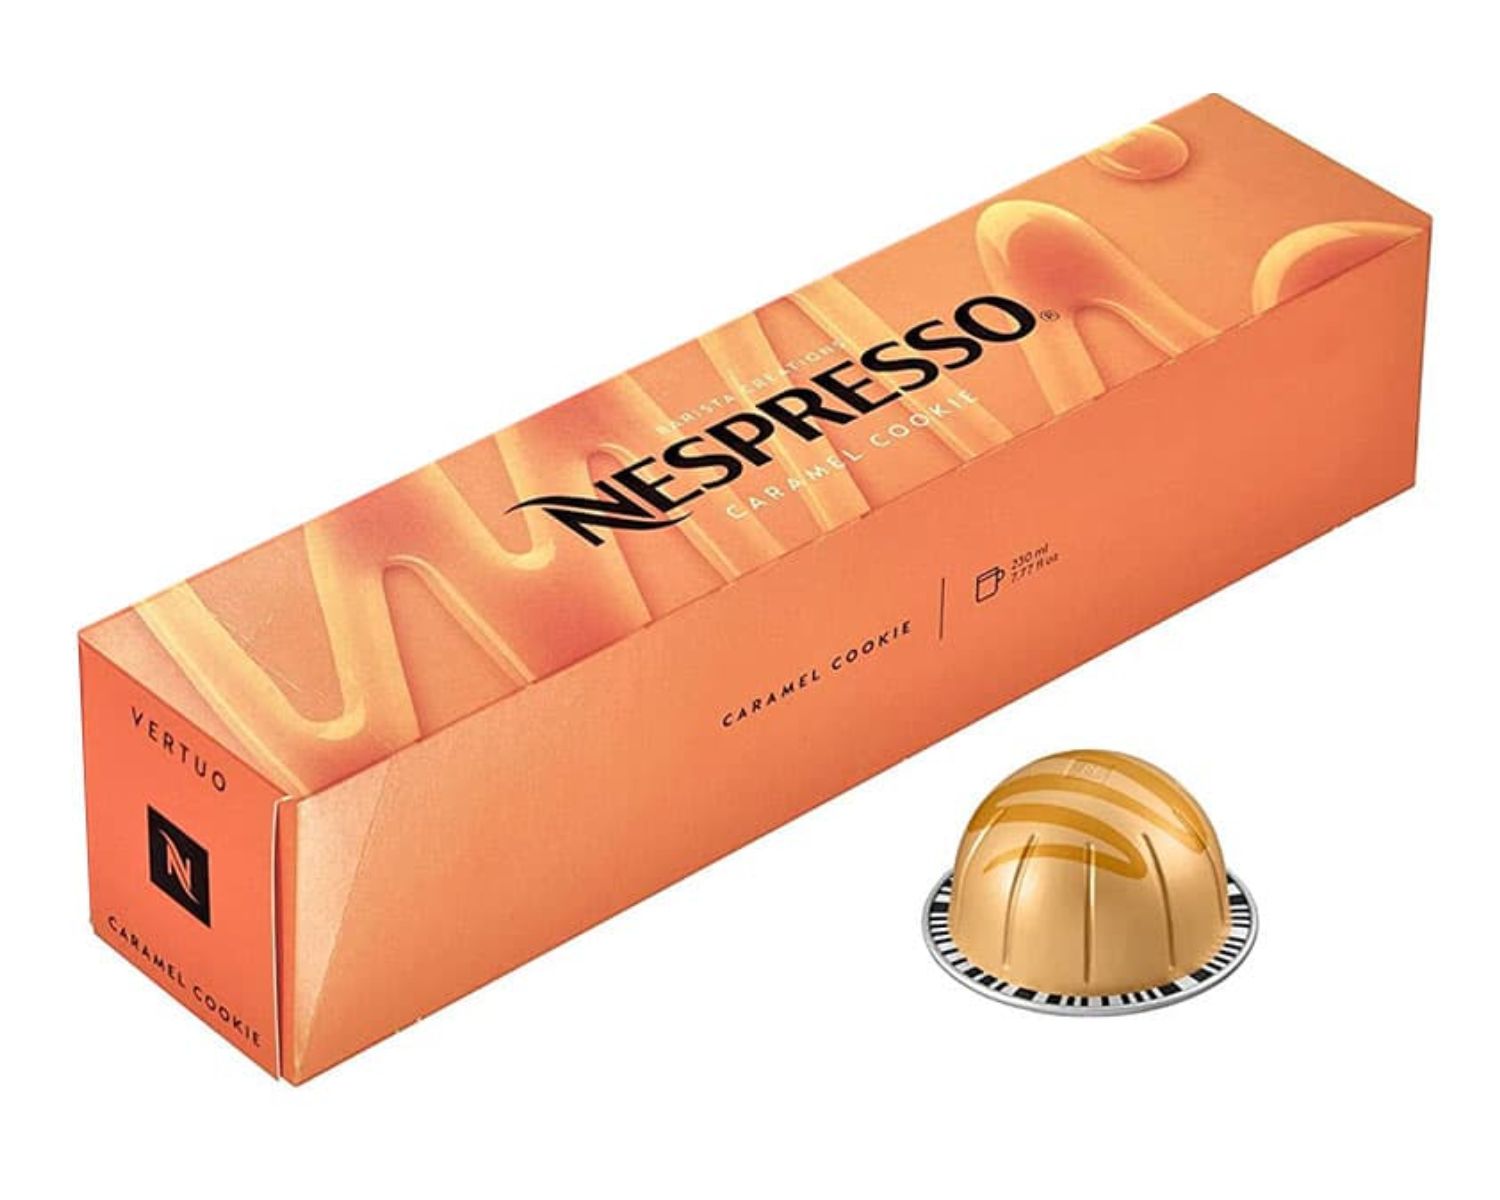 20-caramel-cookie-nespresso-nutrition-facts